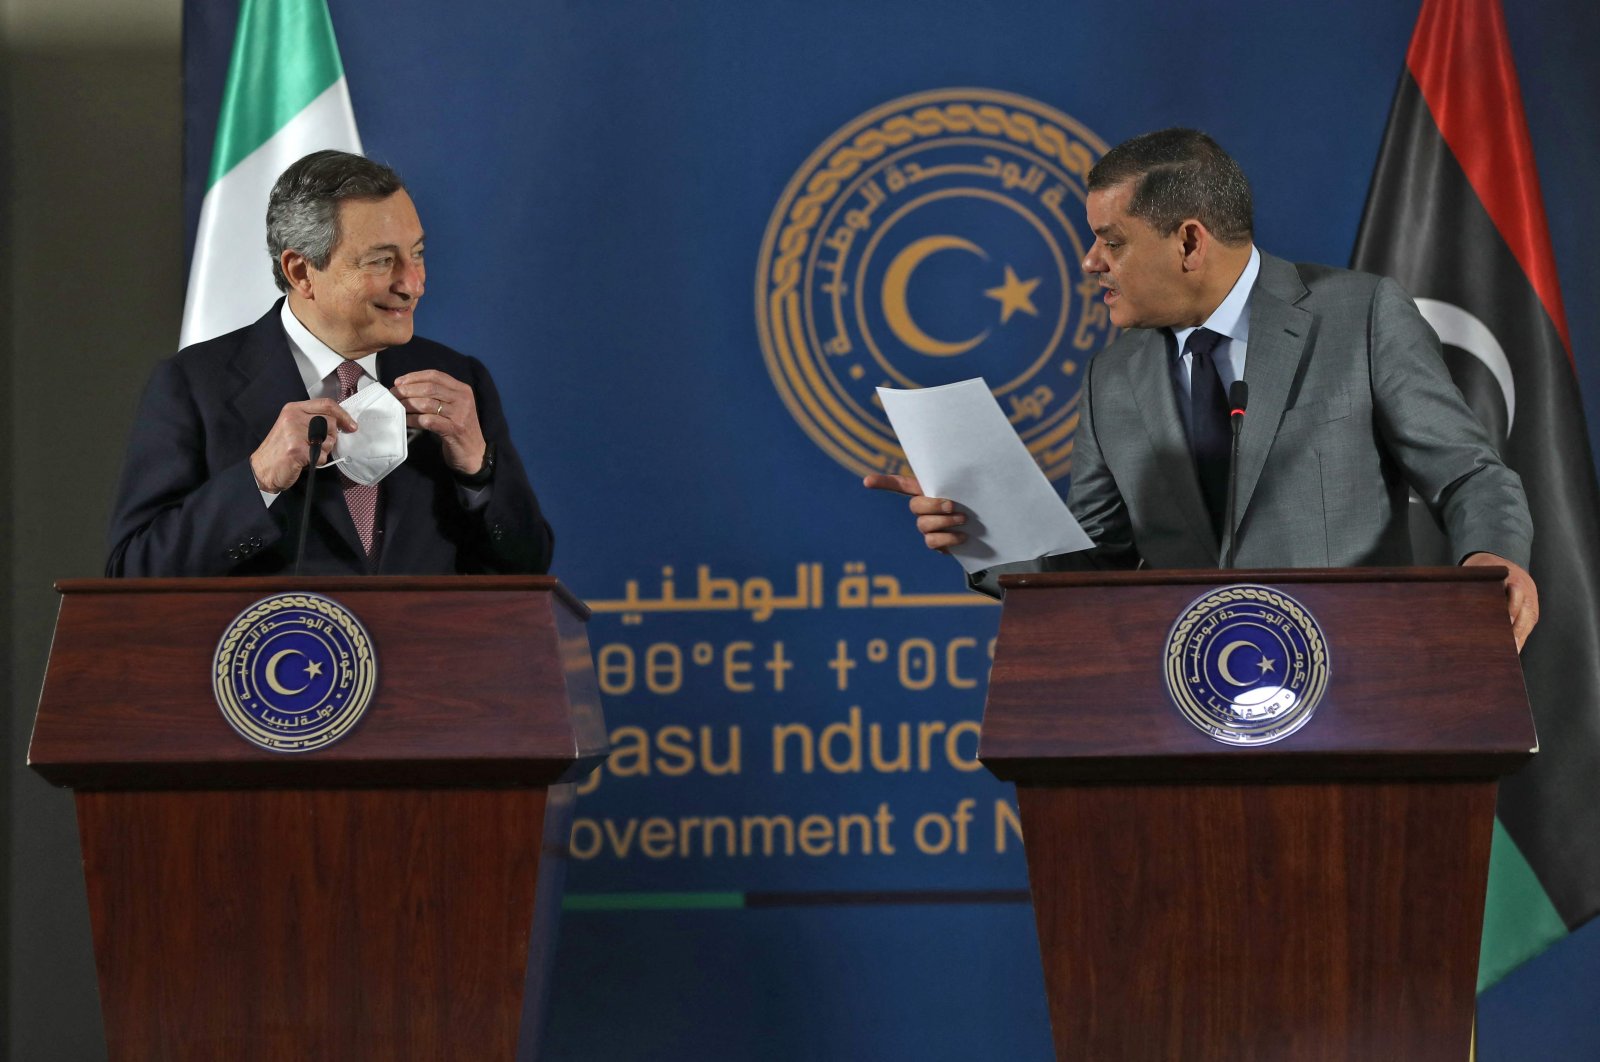 Italian Prime Minister Draghi makes first visit abroad, meet